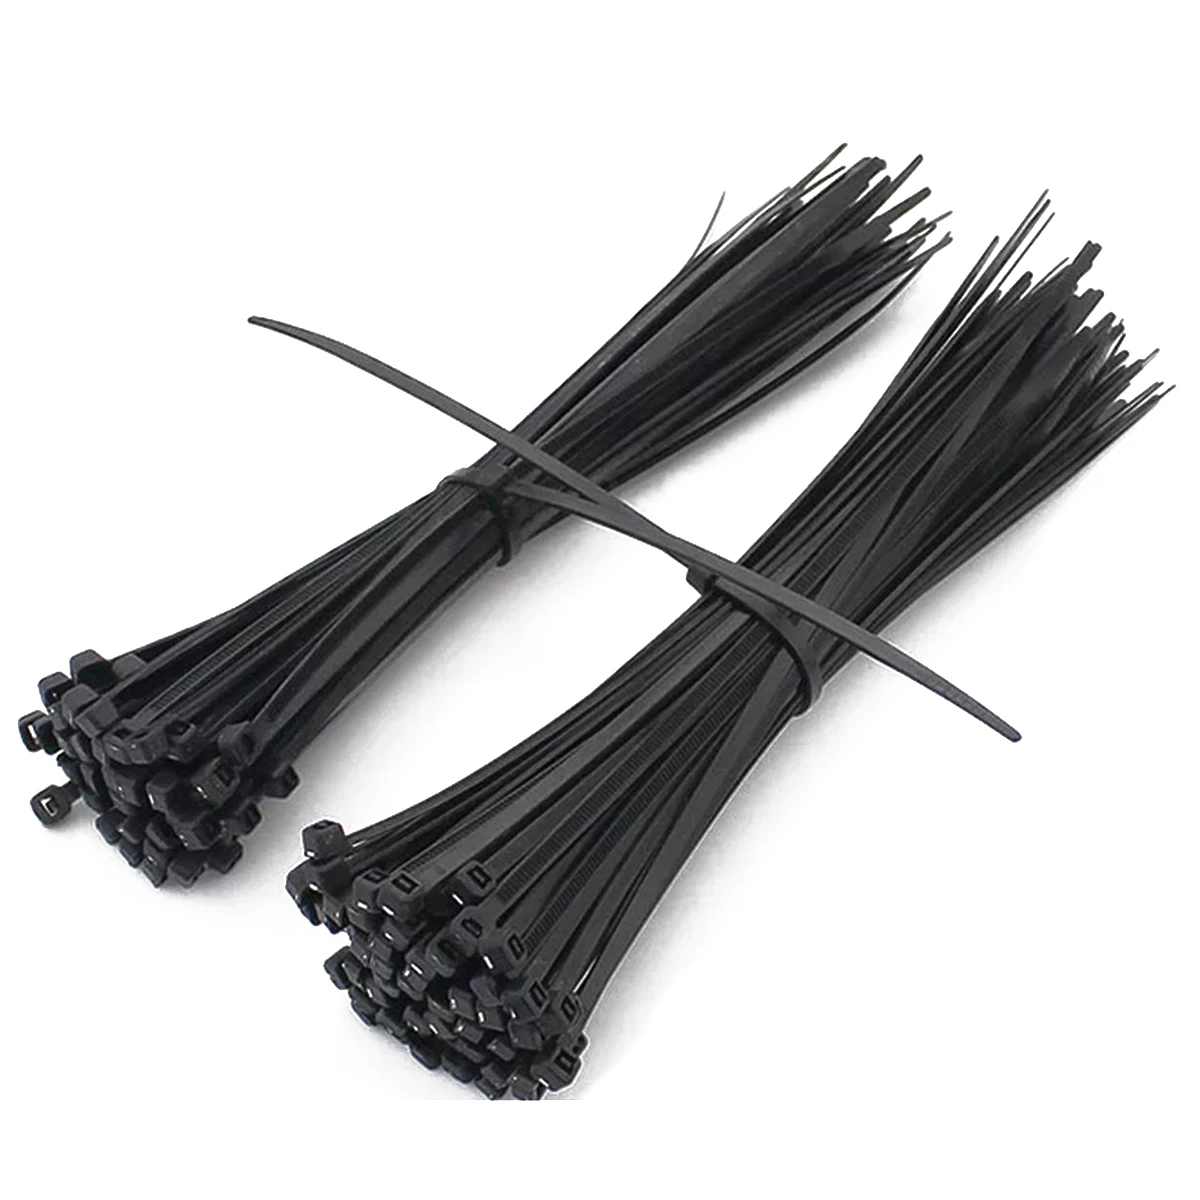 100 x Plastic Cable Ties Tie Wraps Zipties Strong Short and Long 